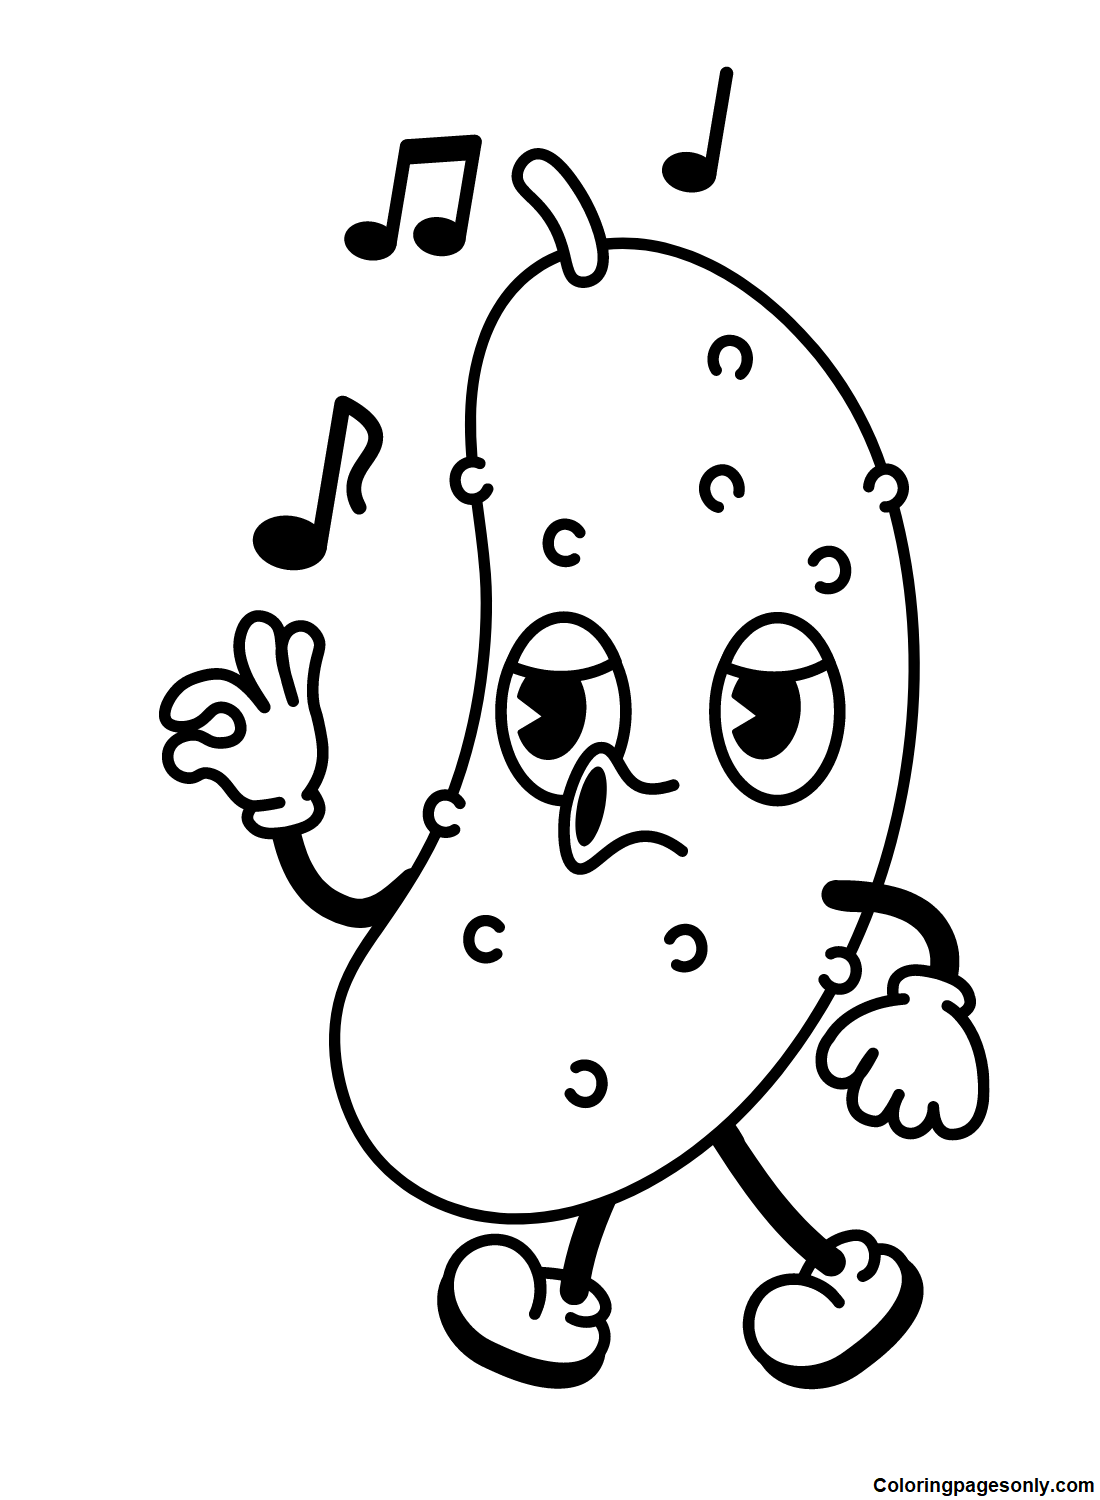 Funny Cucumber Coloring Page